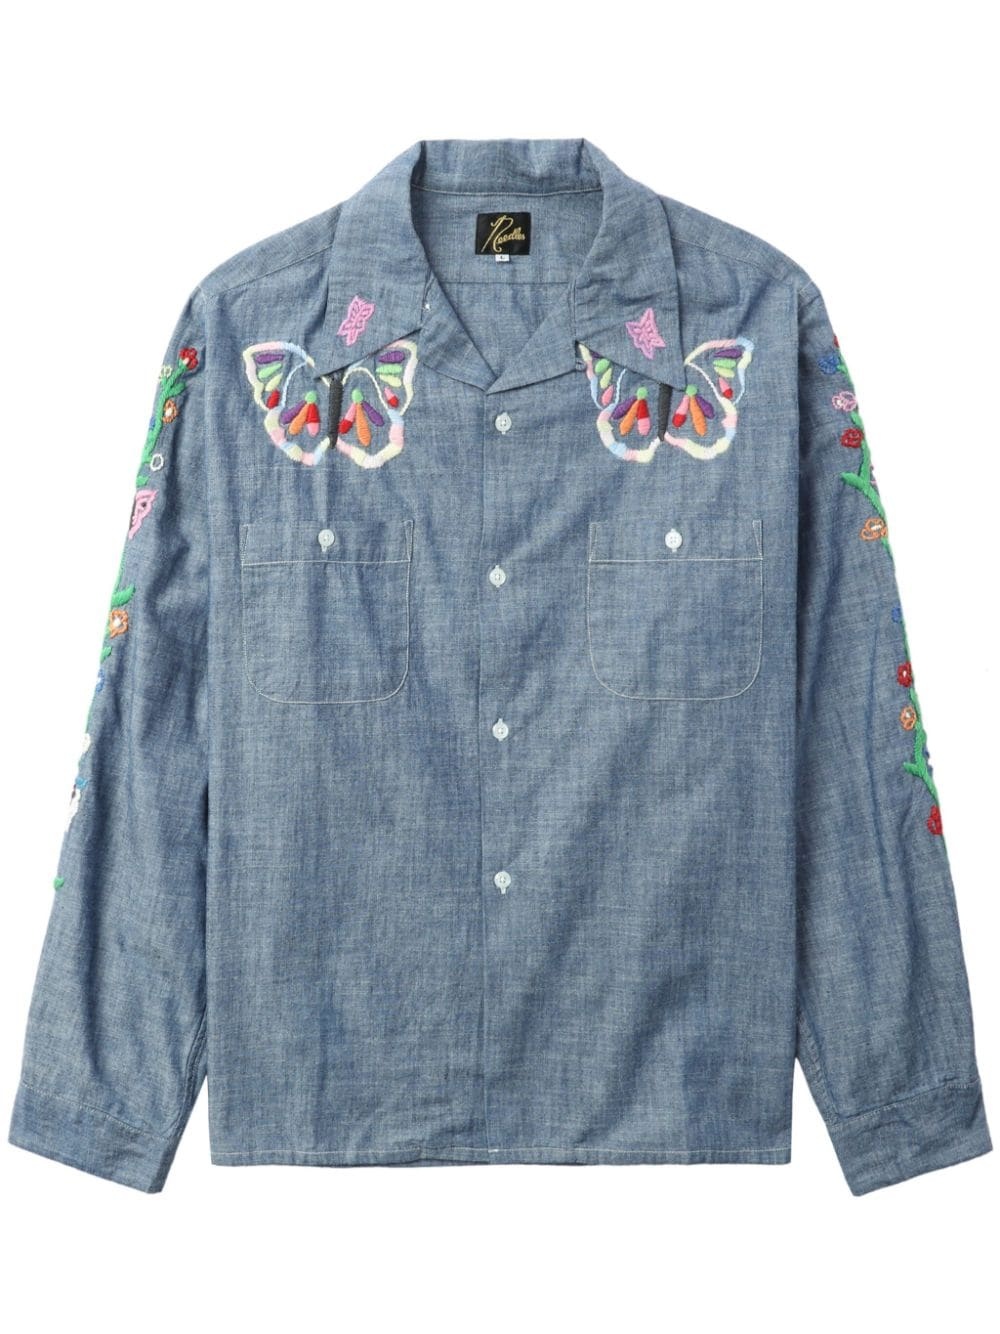 embroidered western shirt - 1